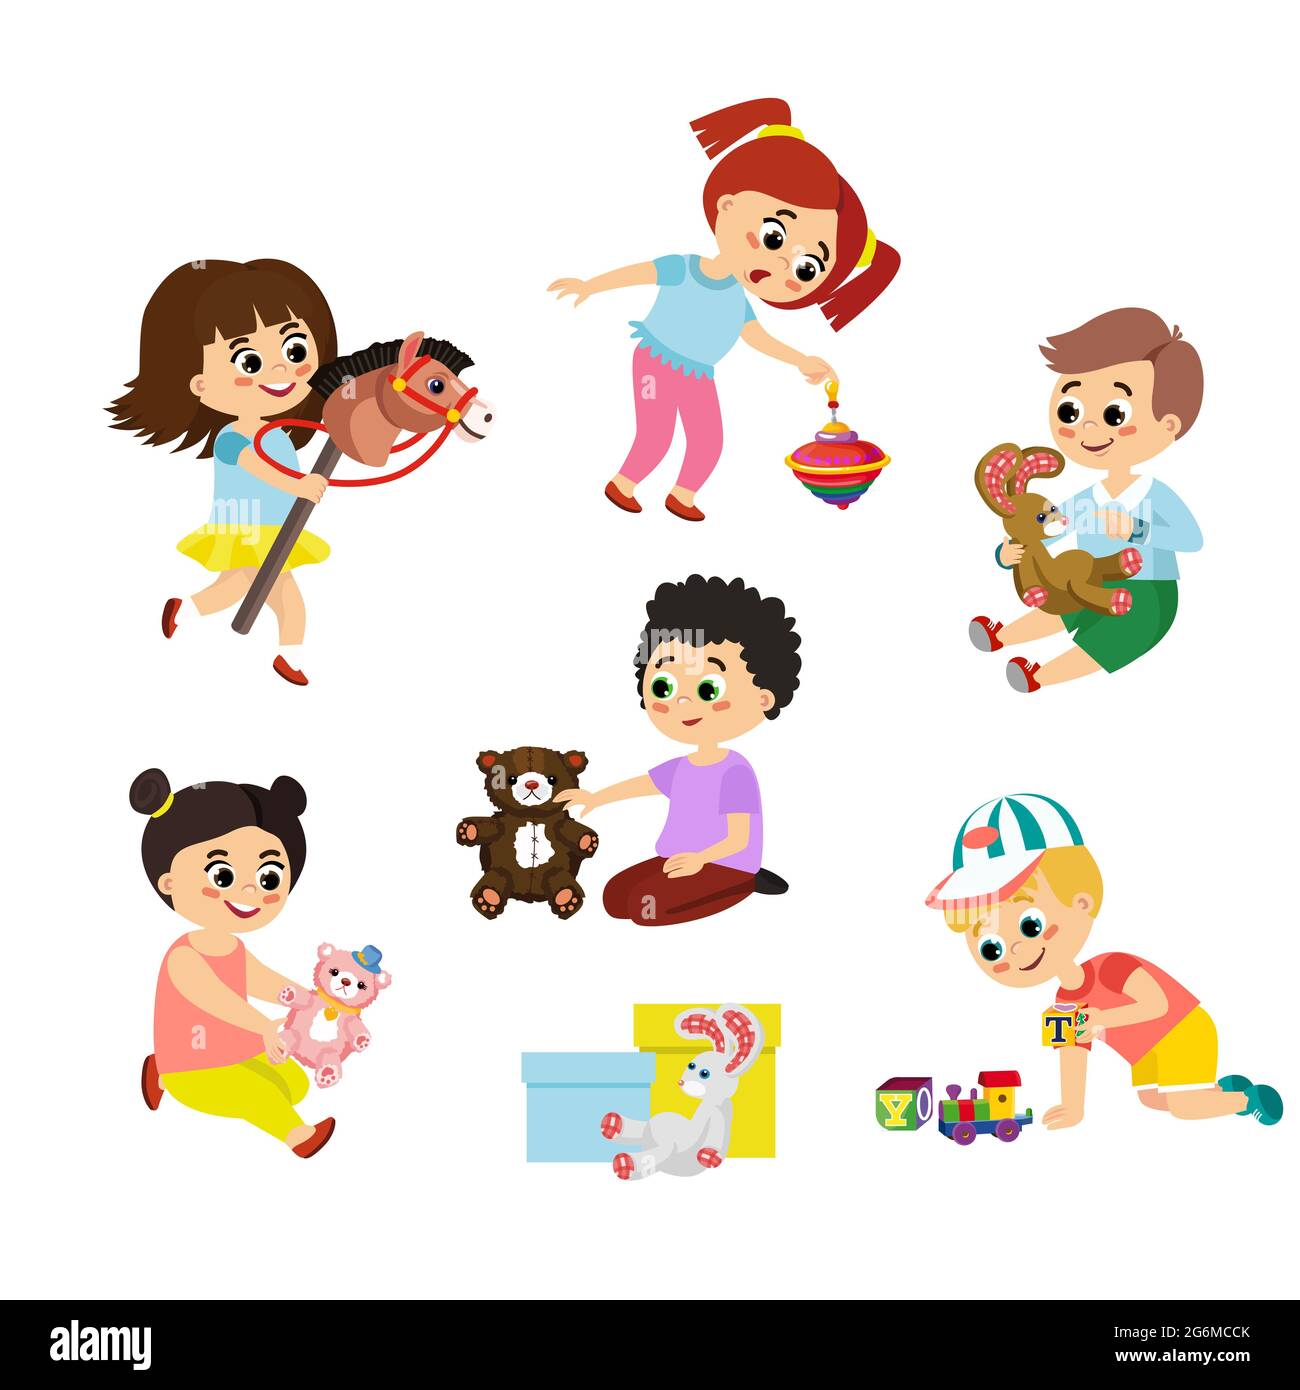 Vector illustration set of children play with toys. Little girl riding a wooden horse, boy hugging a teddy bear and other toys in cartoon flat style. Stock Vector